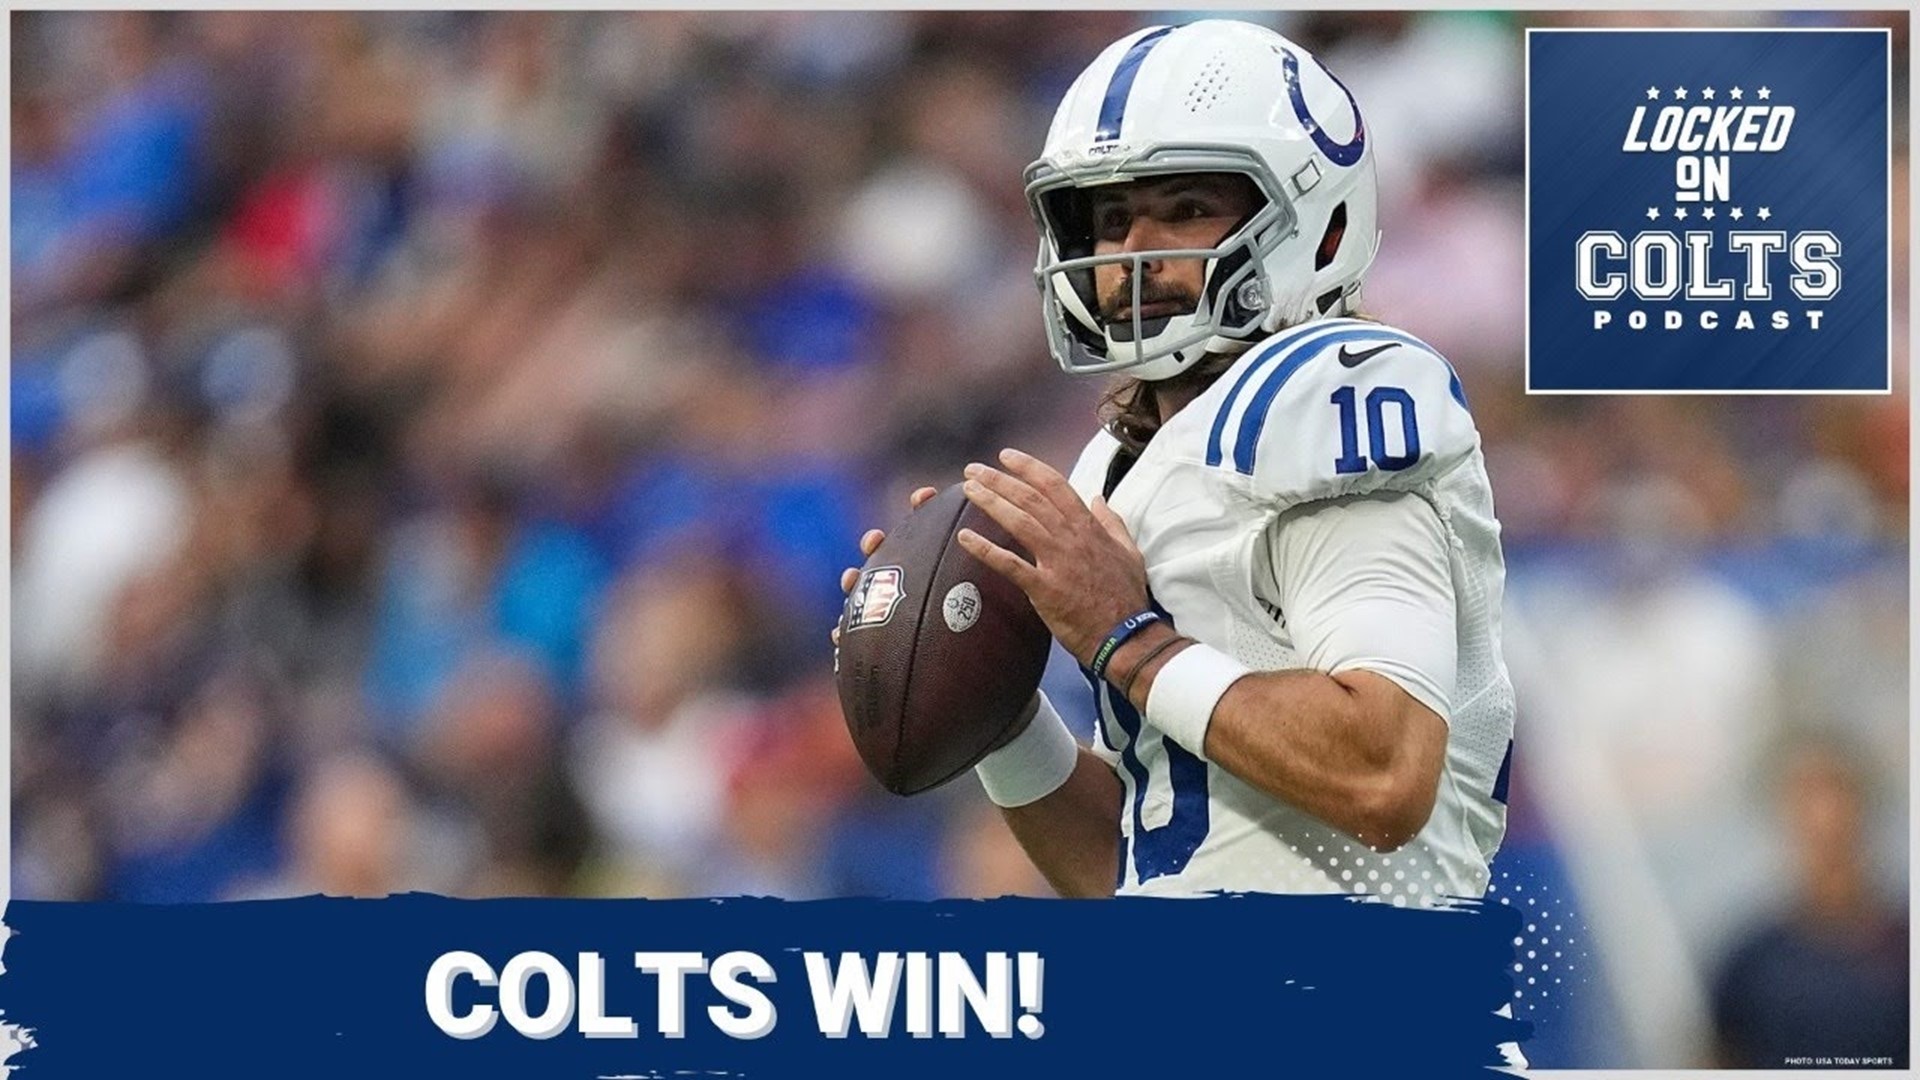 Indianapolis Colts Win 24-17 Over the Chicago Bears! 